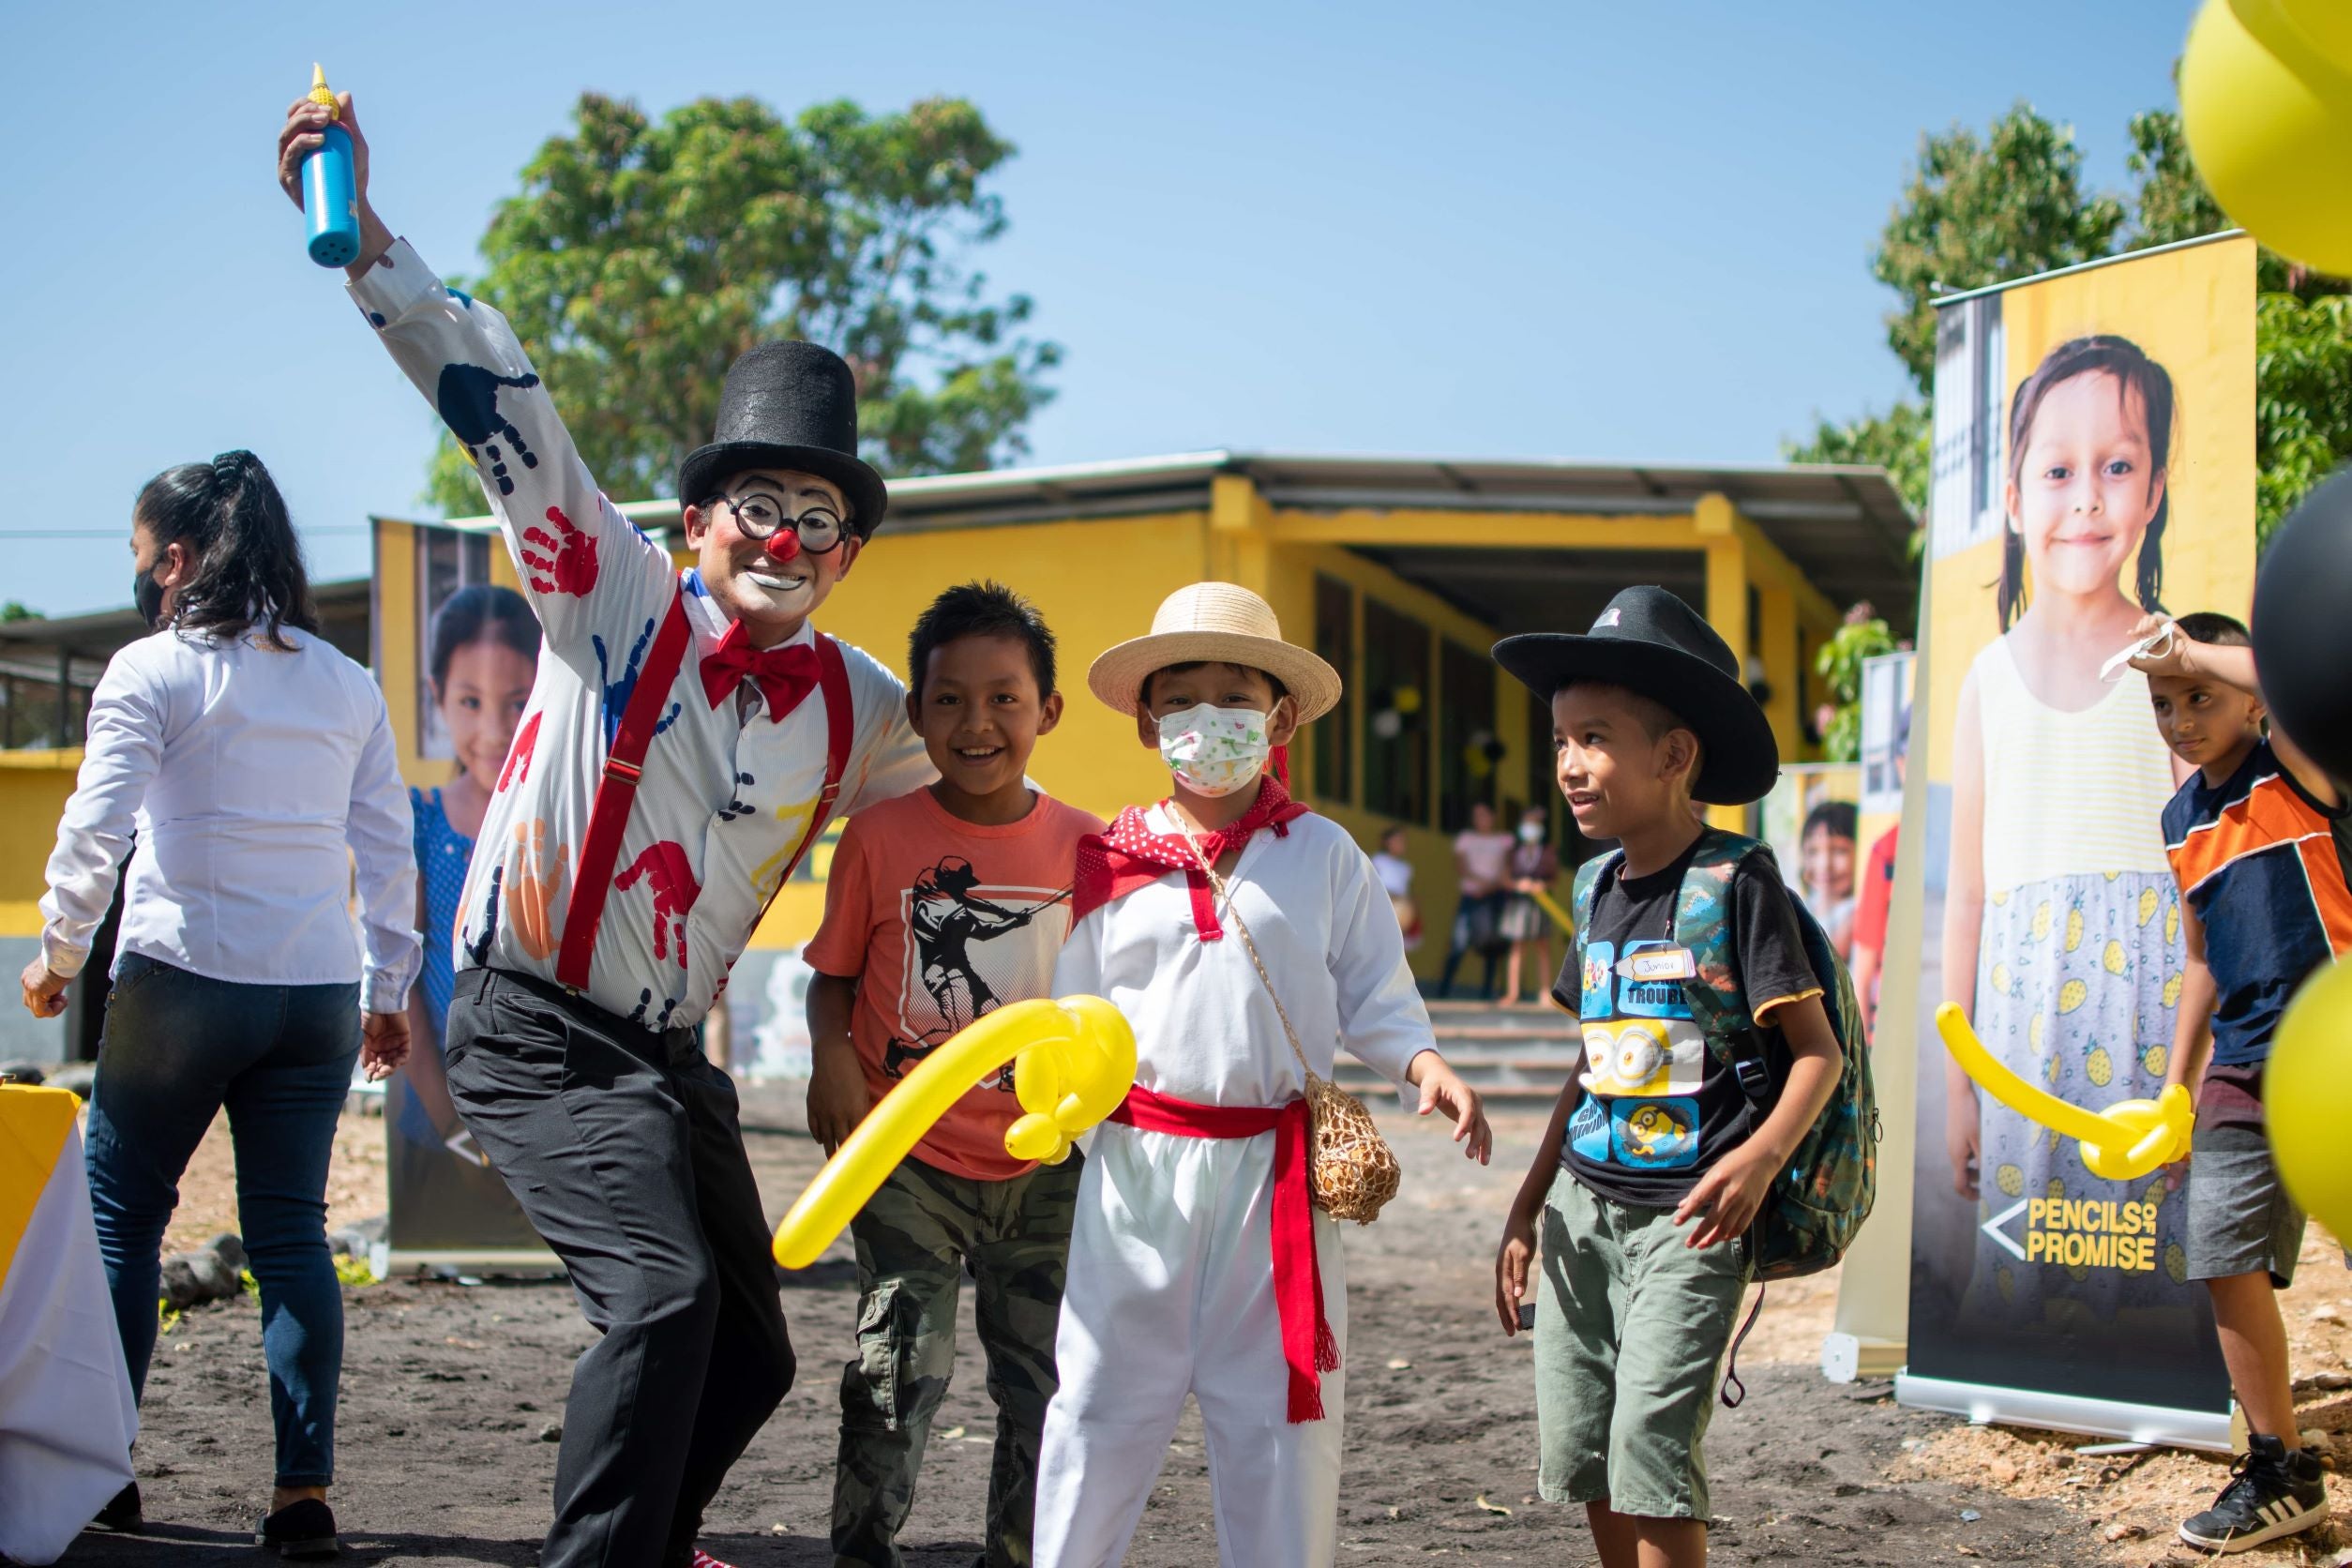 Children celebrating with the help of a cheerful clown